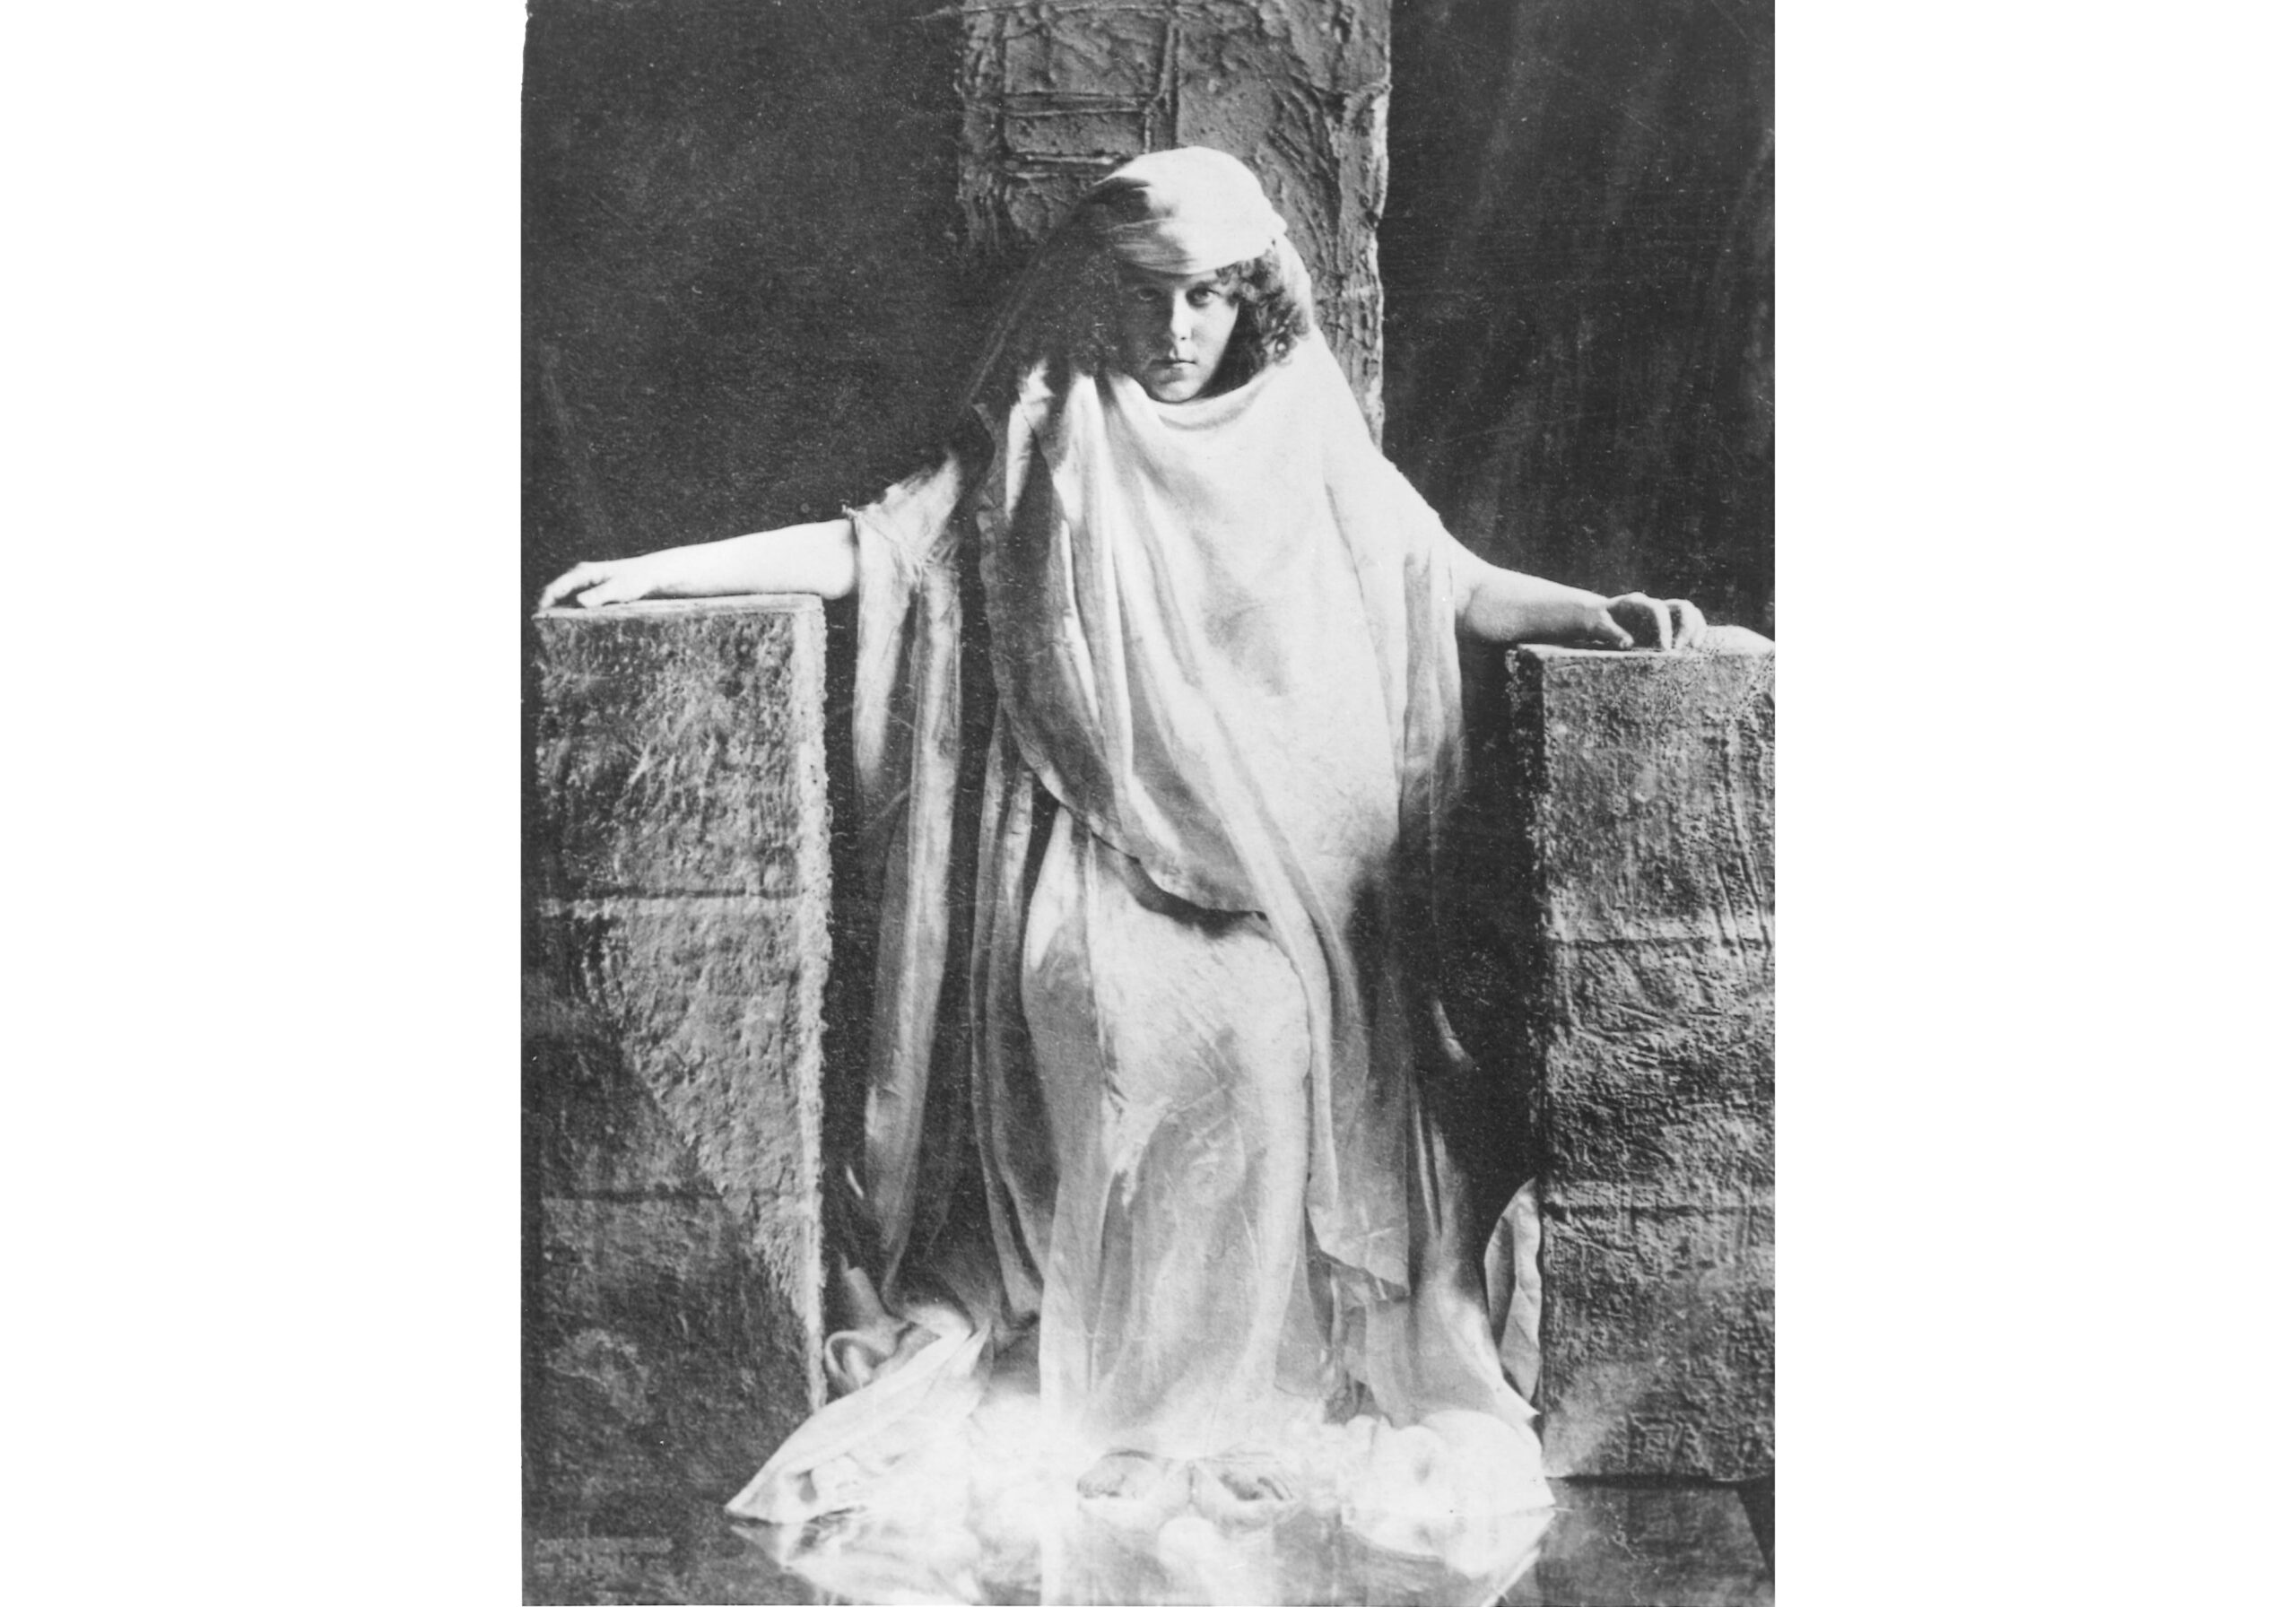 Fuller, wearing a flowing garment and headdress, sits regally on a stone throne.